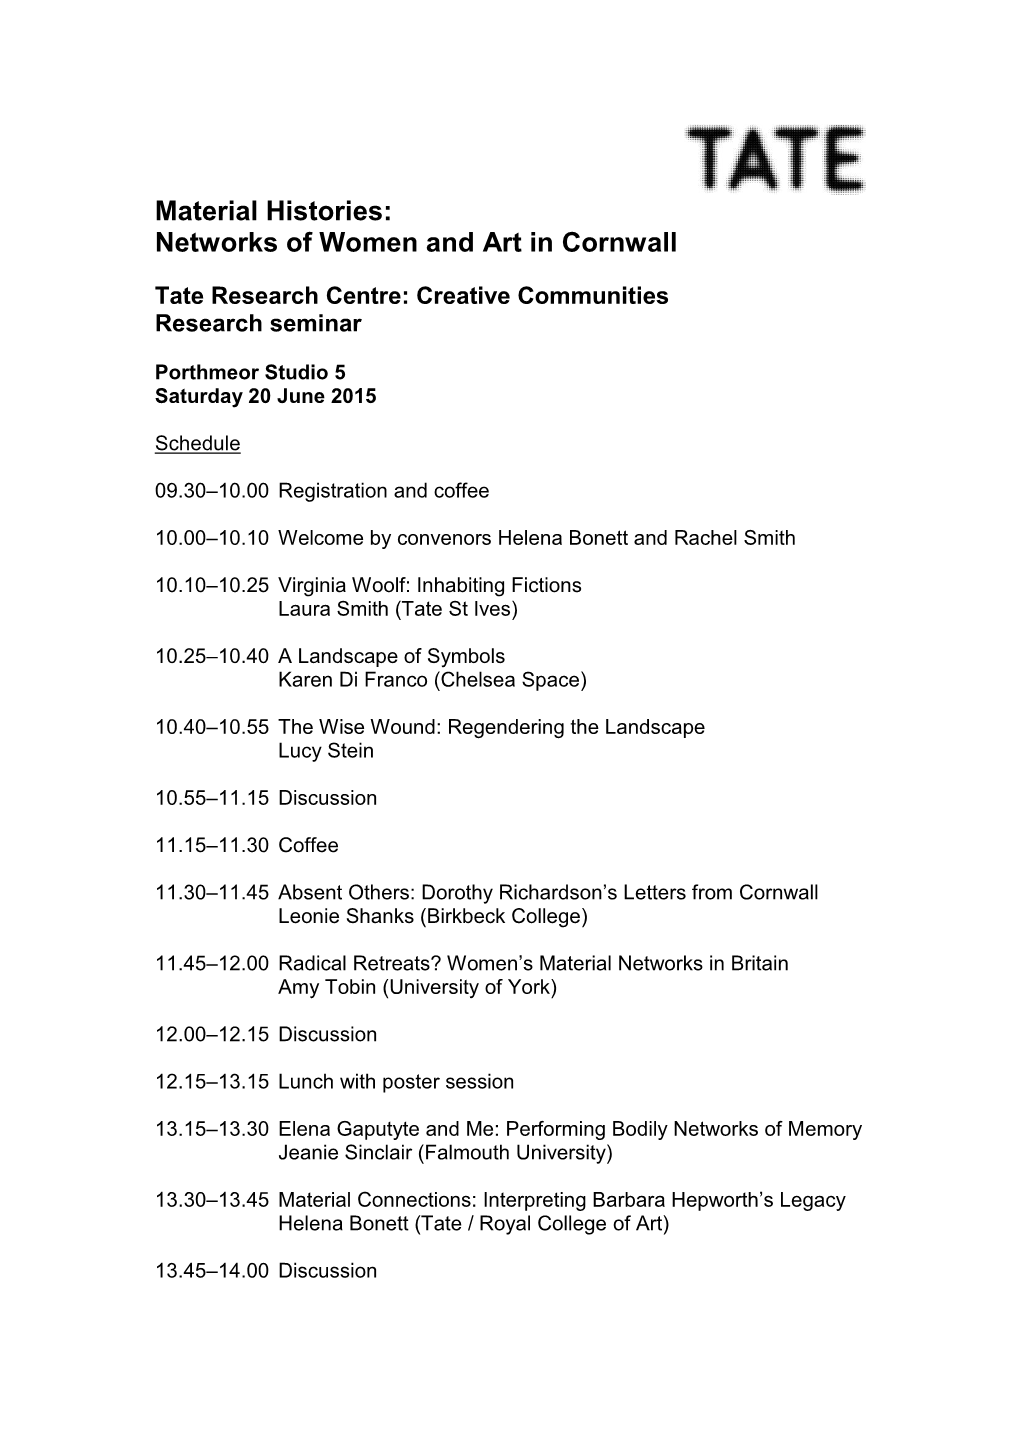 Material Histories: Networks of Women and Art in Cornwall